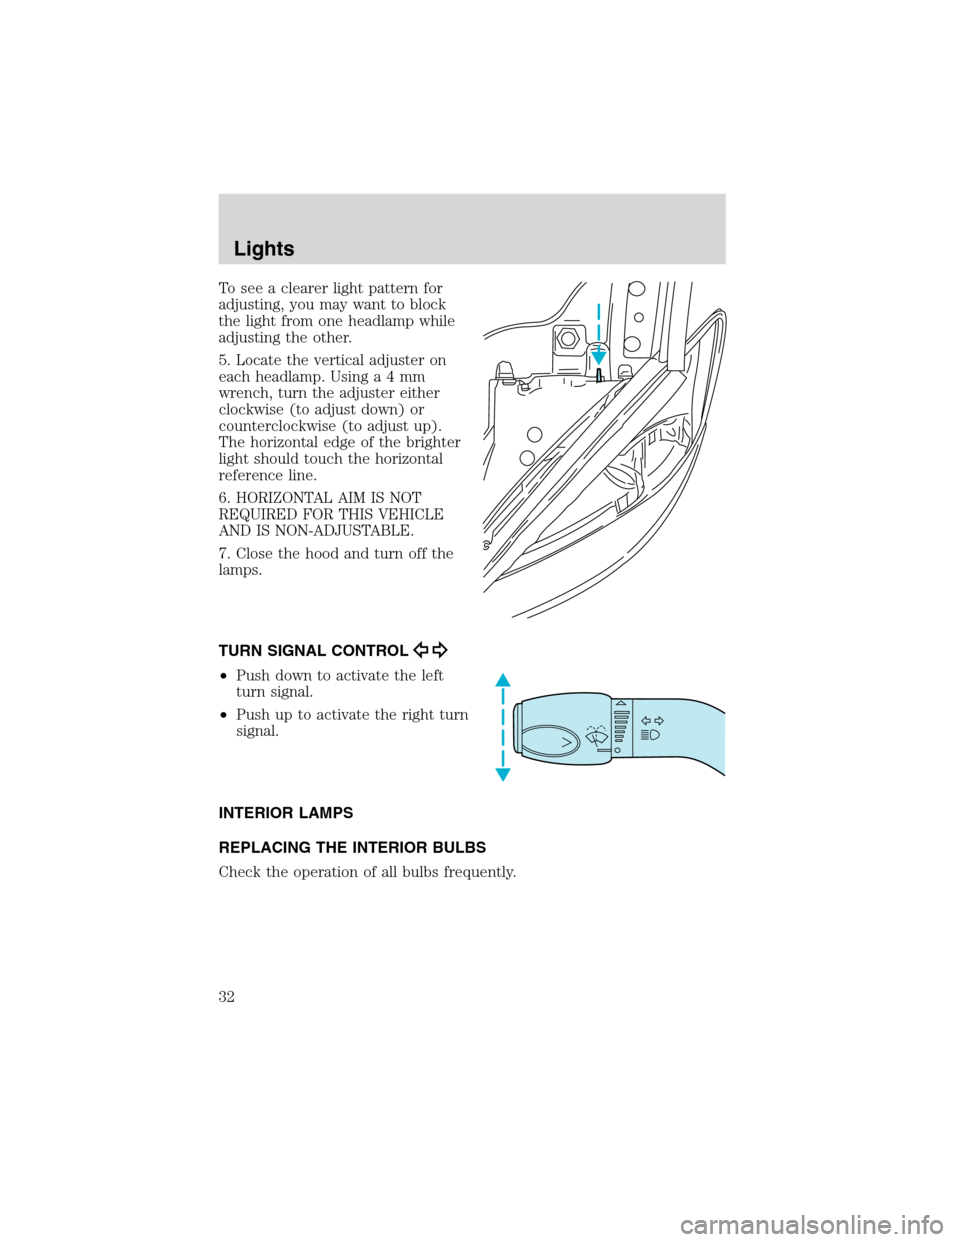 Mercury Sable 2003  Owners Manuals To see a clearer light pattern for
adjusting, you may want to block
the light from one headlamp while
adjusting the other.
5. Locate the vertical adjuster on
each headlamp. Usinga4mm
wrench, turn the 